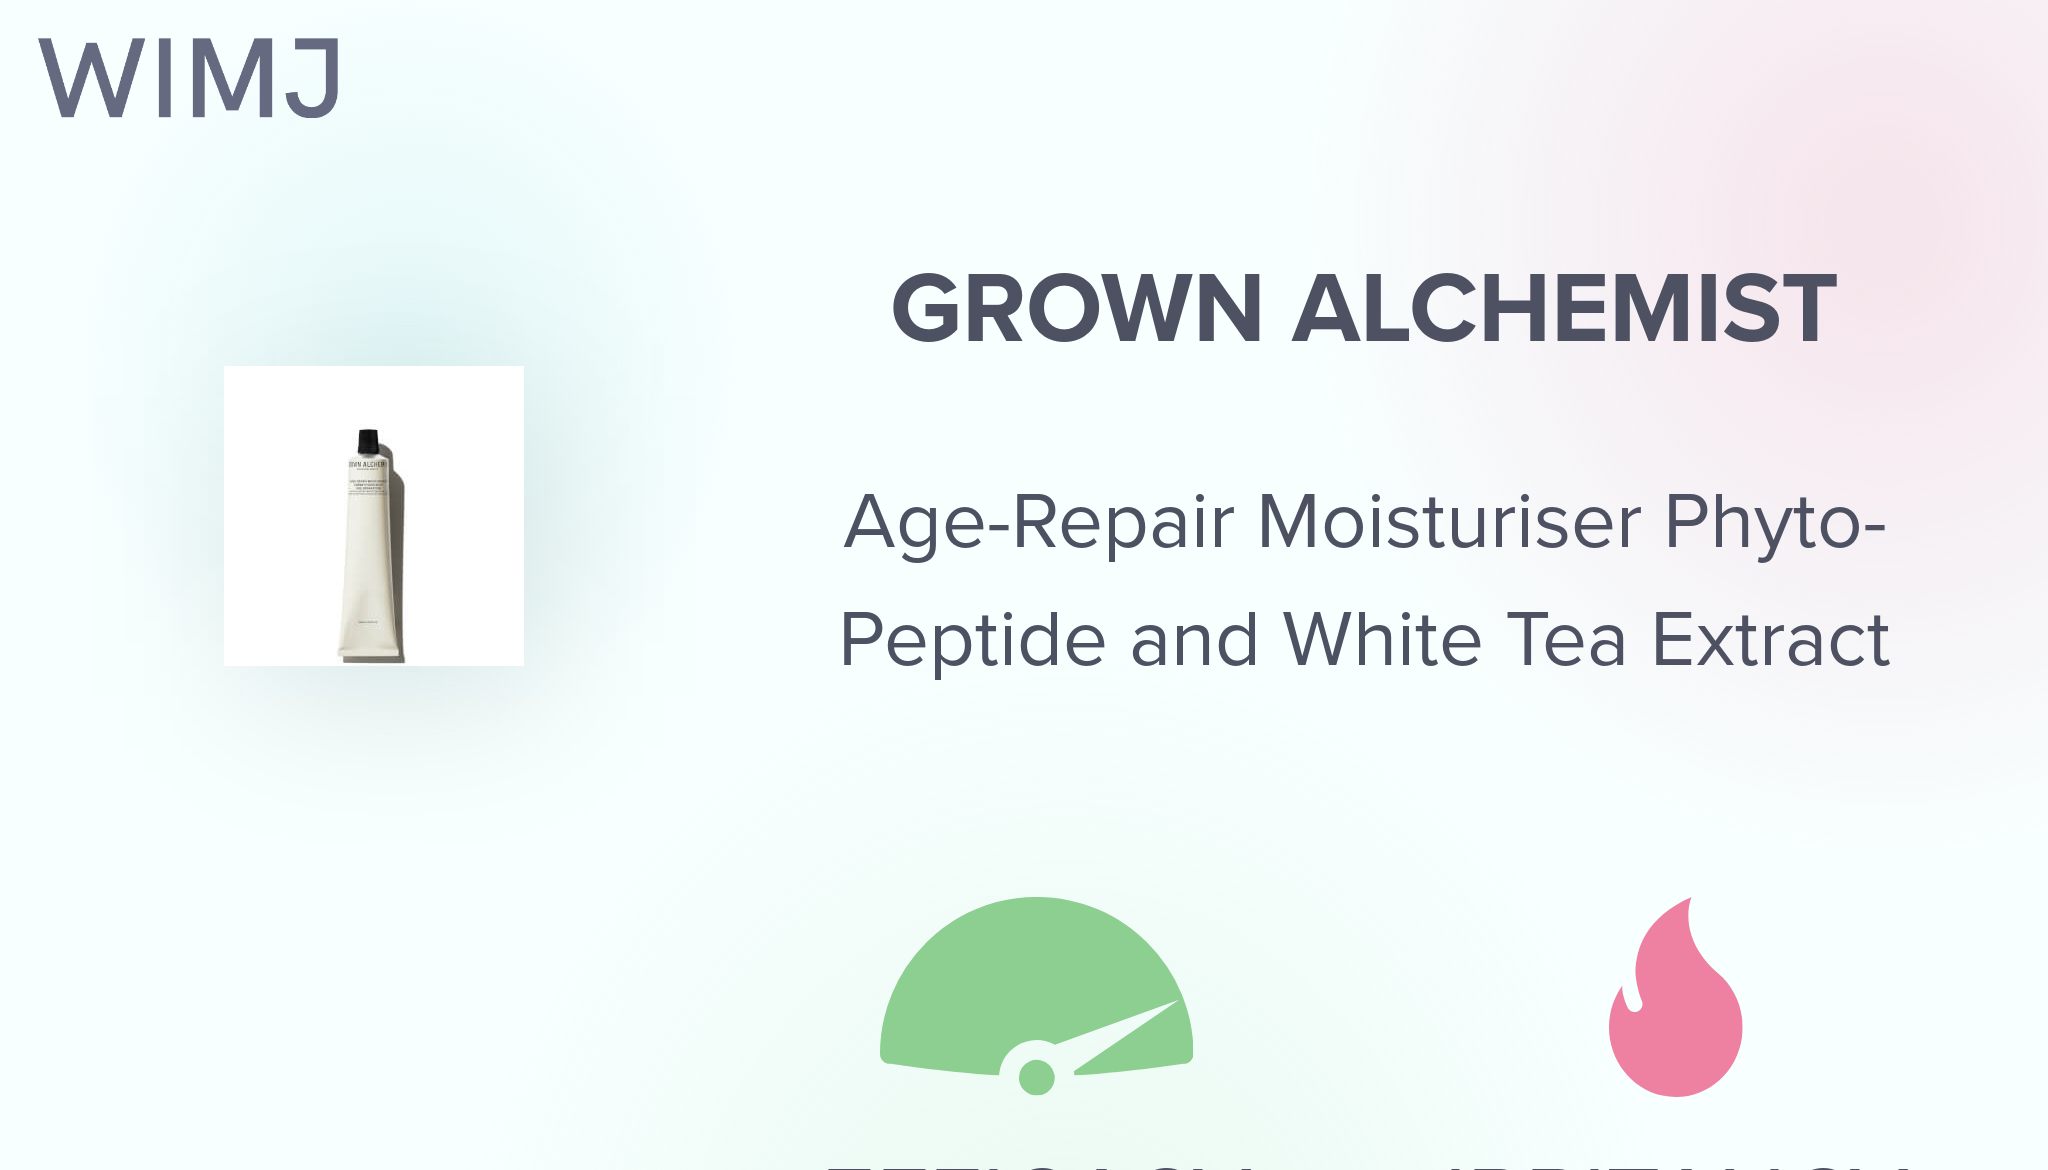 Review: Grown Alchemist Phyto-Peptide Extract and Tea Moisturiser - WIMJ White - Age-Repair